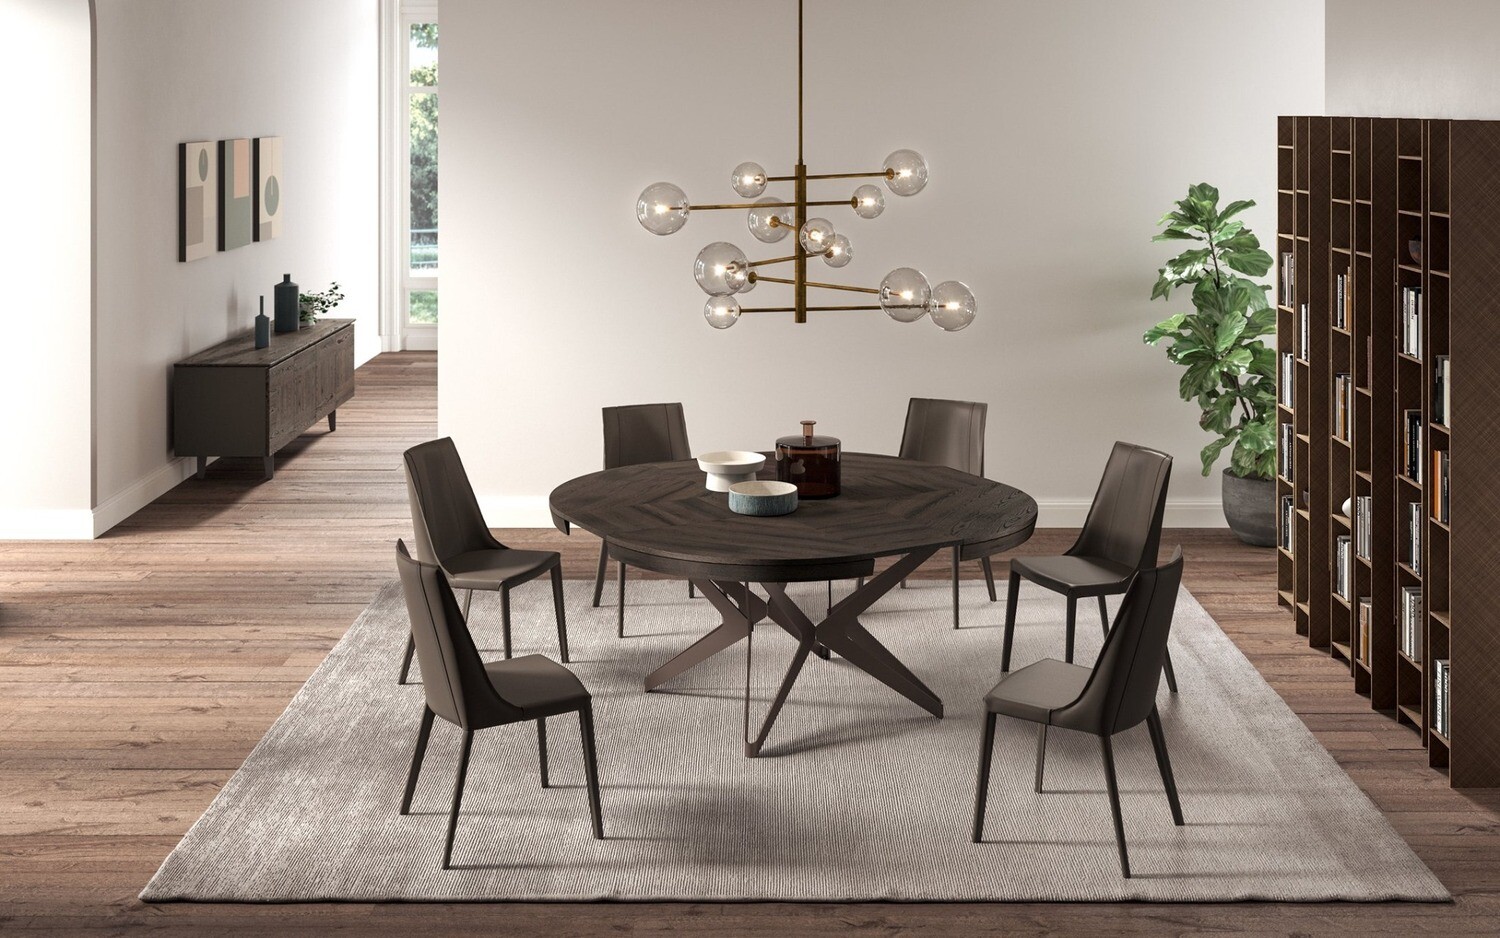 BIG ROUND | Table extensible